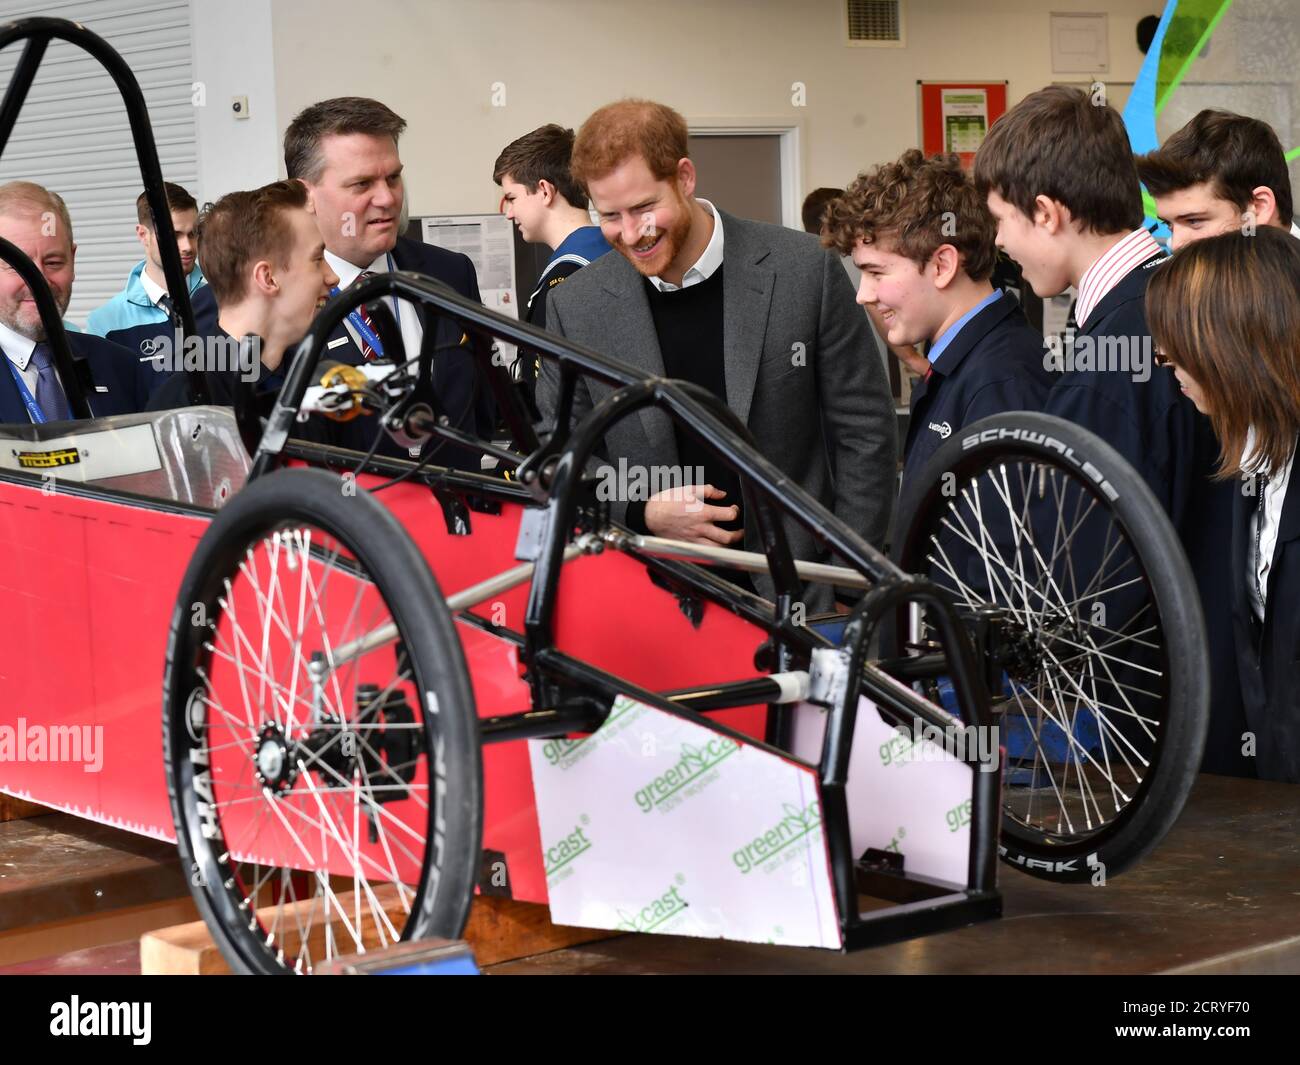 Britain's Prince Harry talks to students and apprentices during a visit to the Silverstone University Technical College at Silverstone, Britain, March 7, 2018. REUTERS/Arthur Edwards/Pool Stock Photo